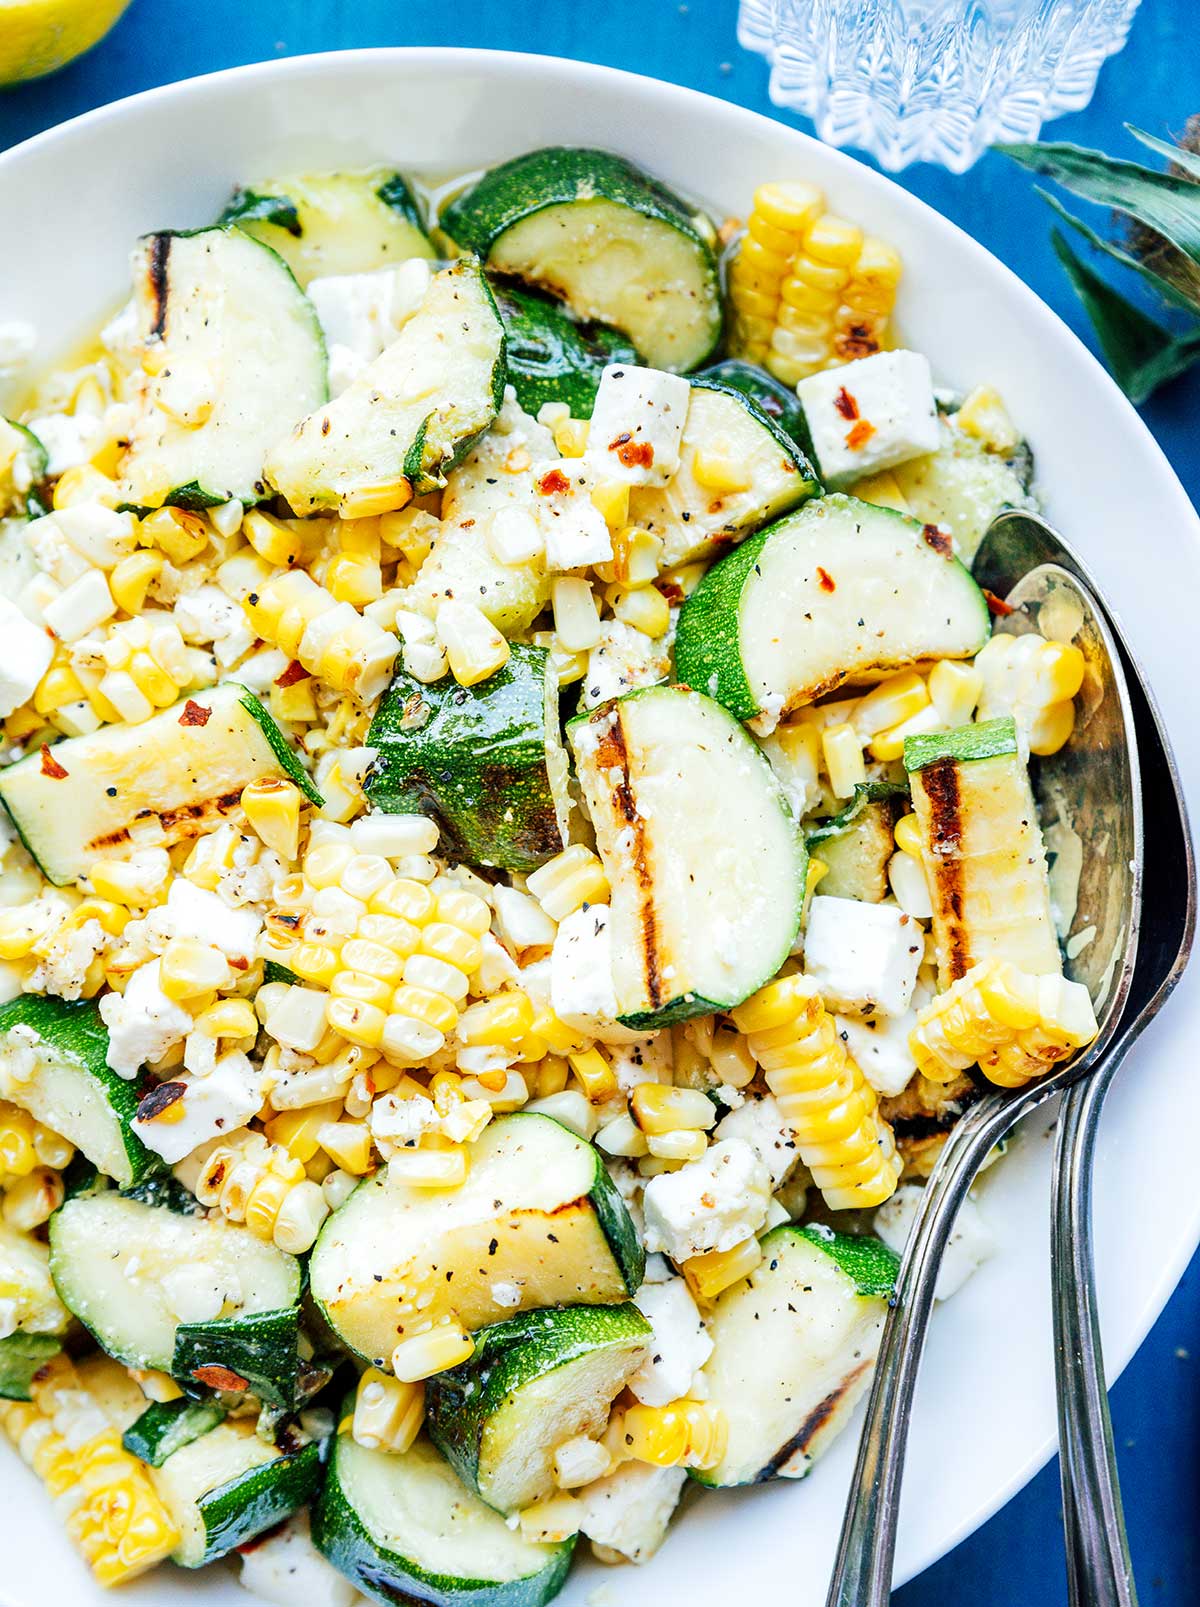 Zucchini corn salad on a white plate with serving spoons.